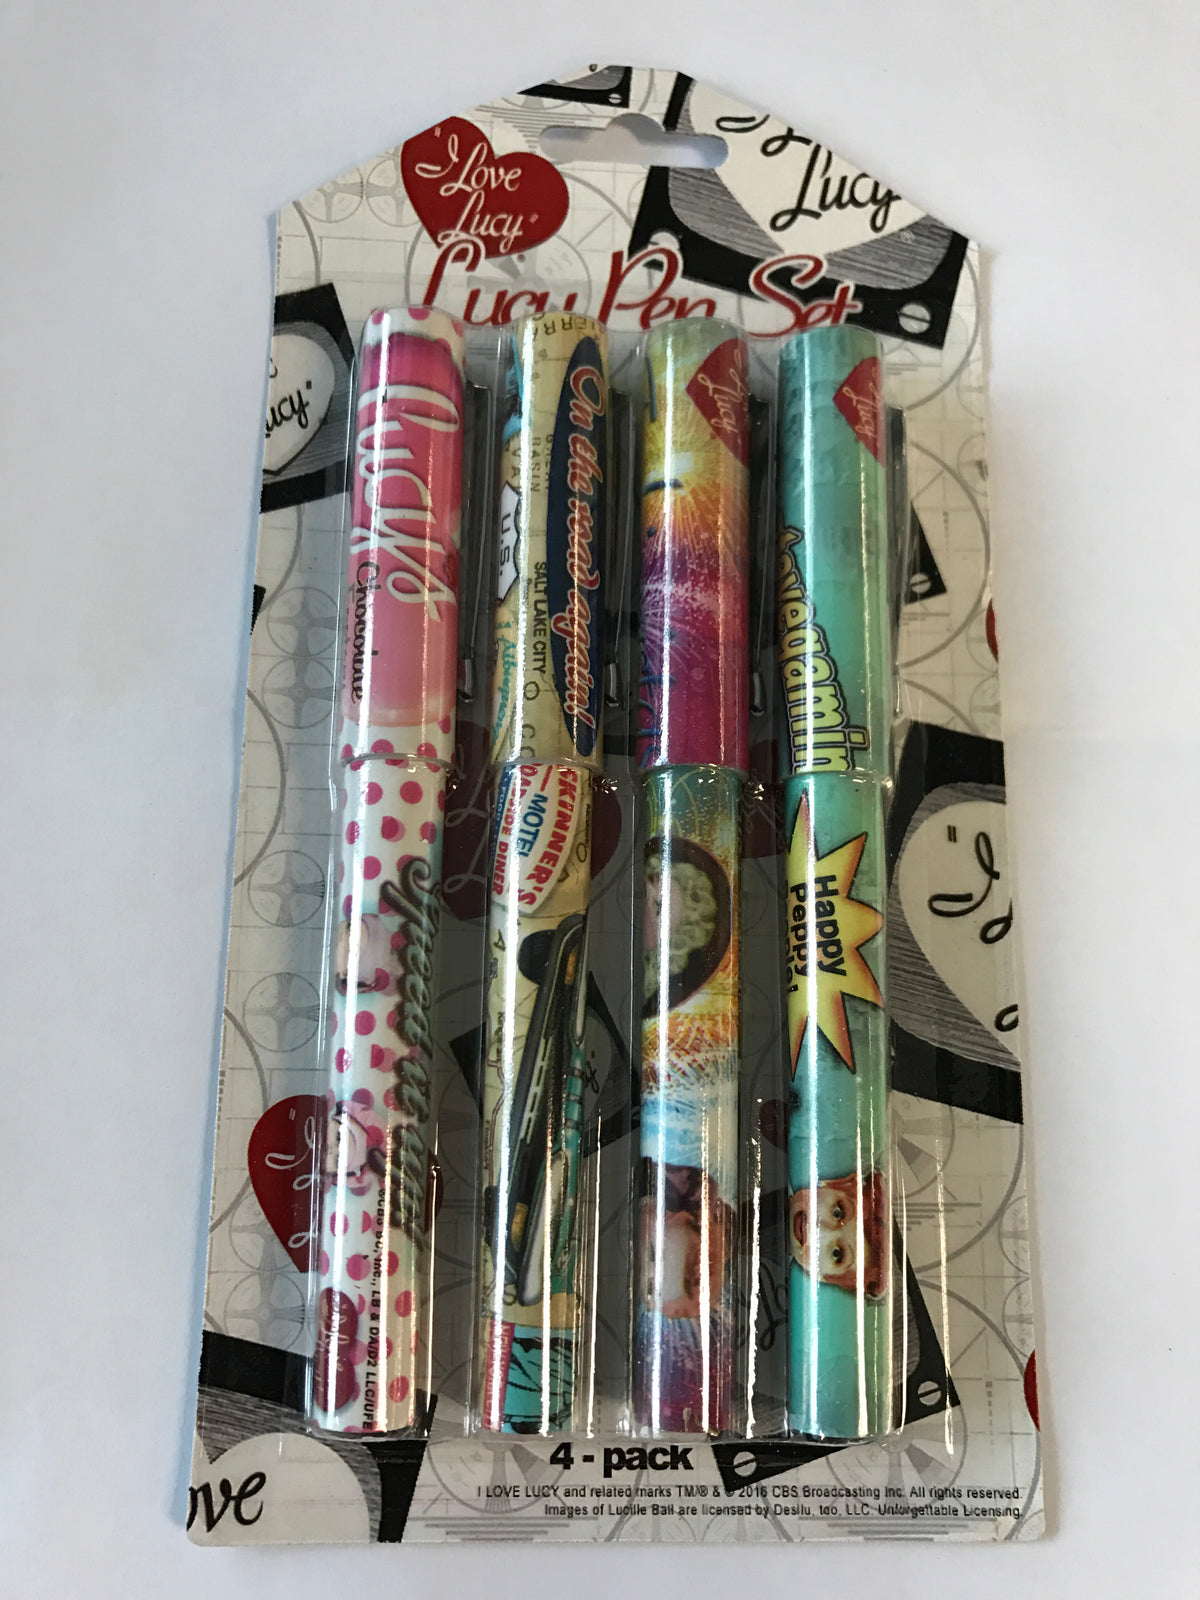 I Love Lucy: 4-Pack Pen Set